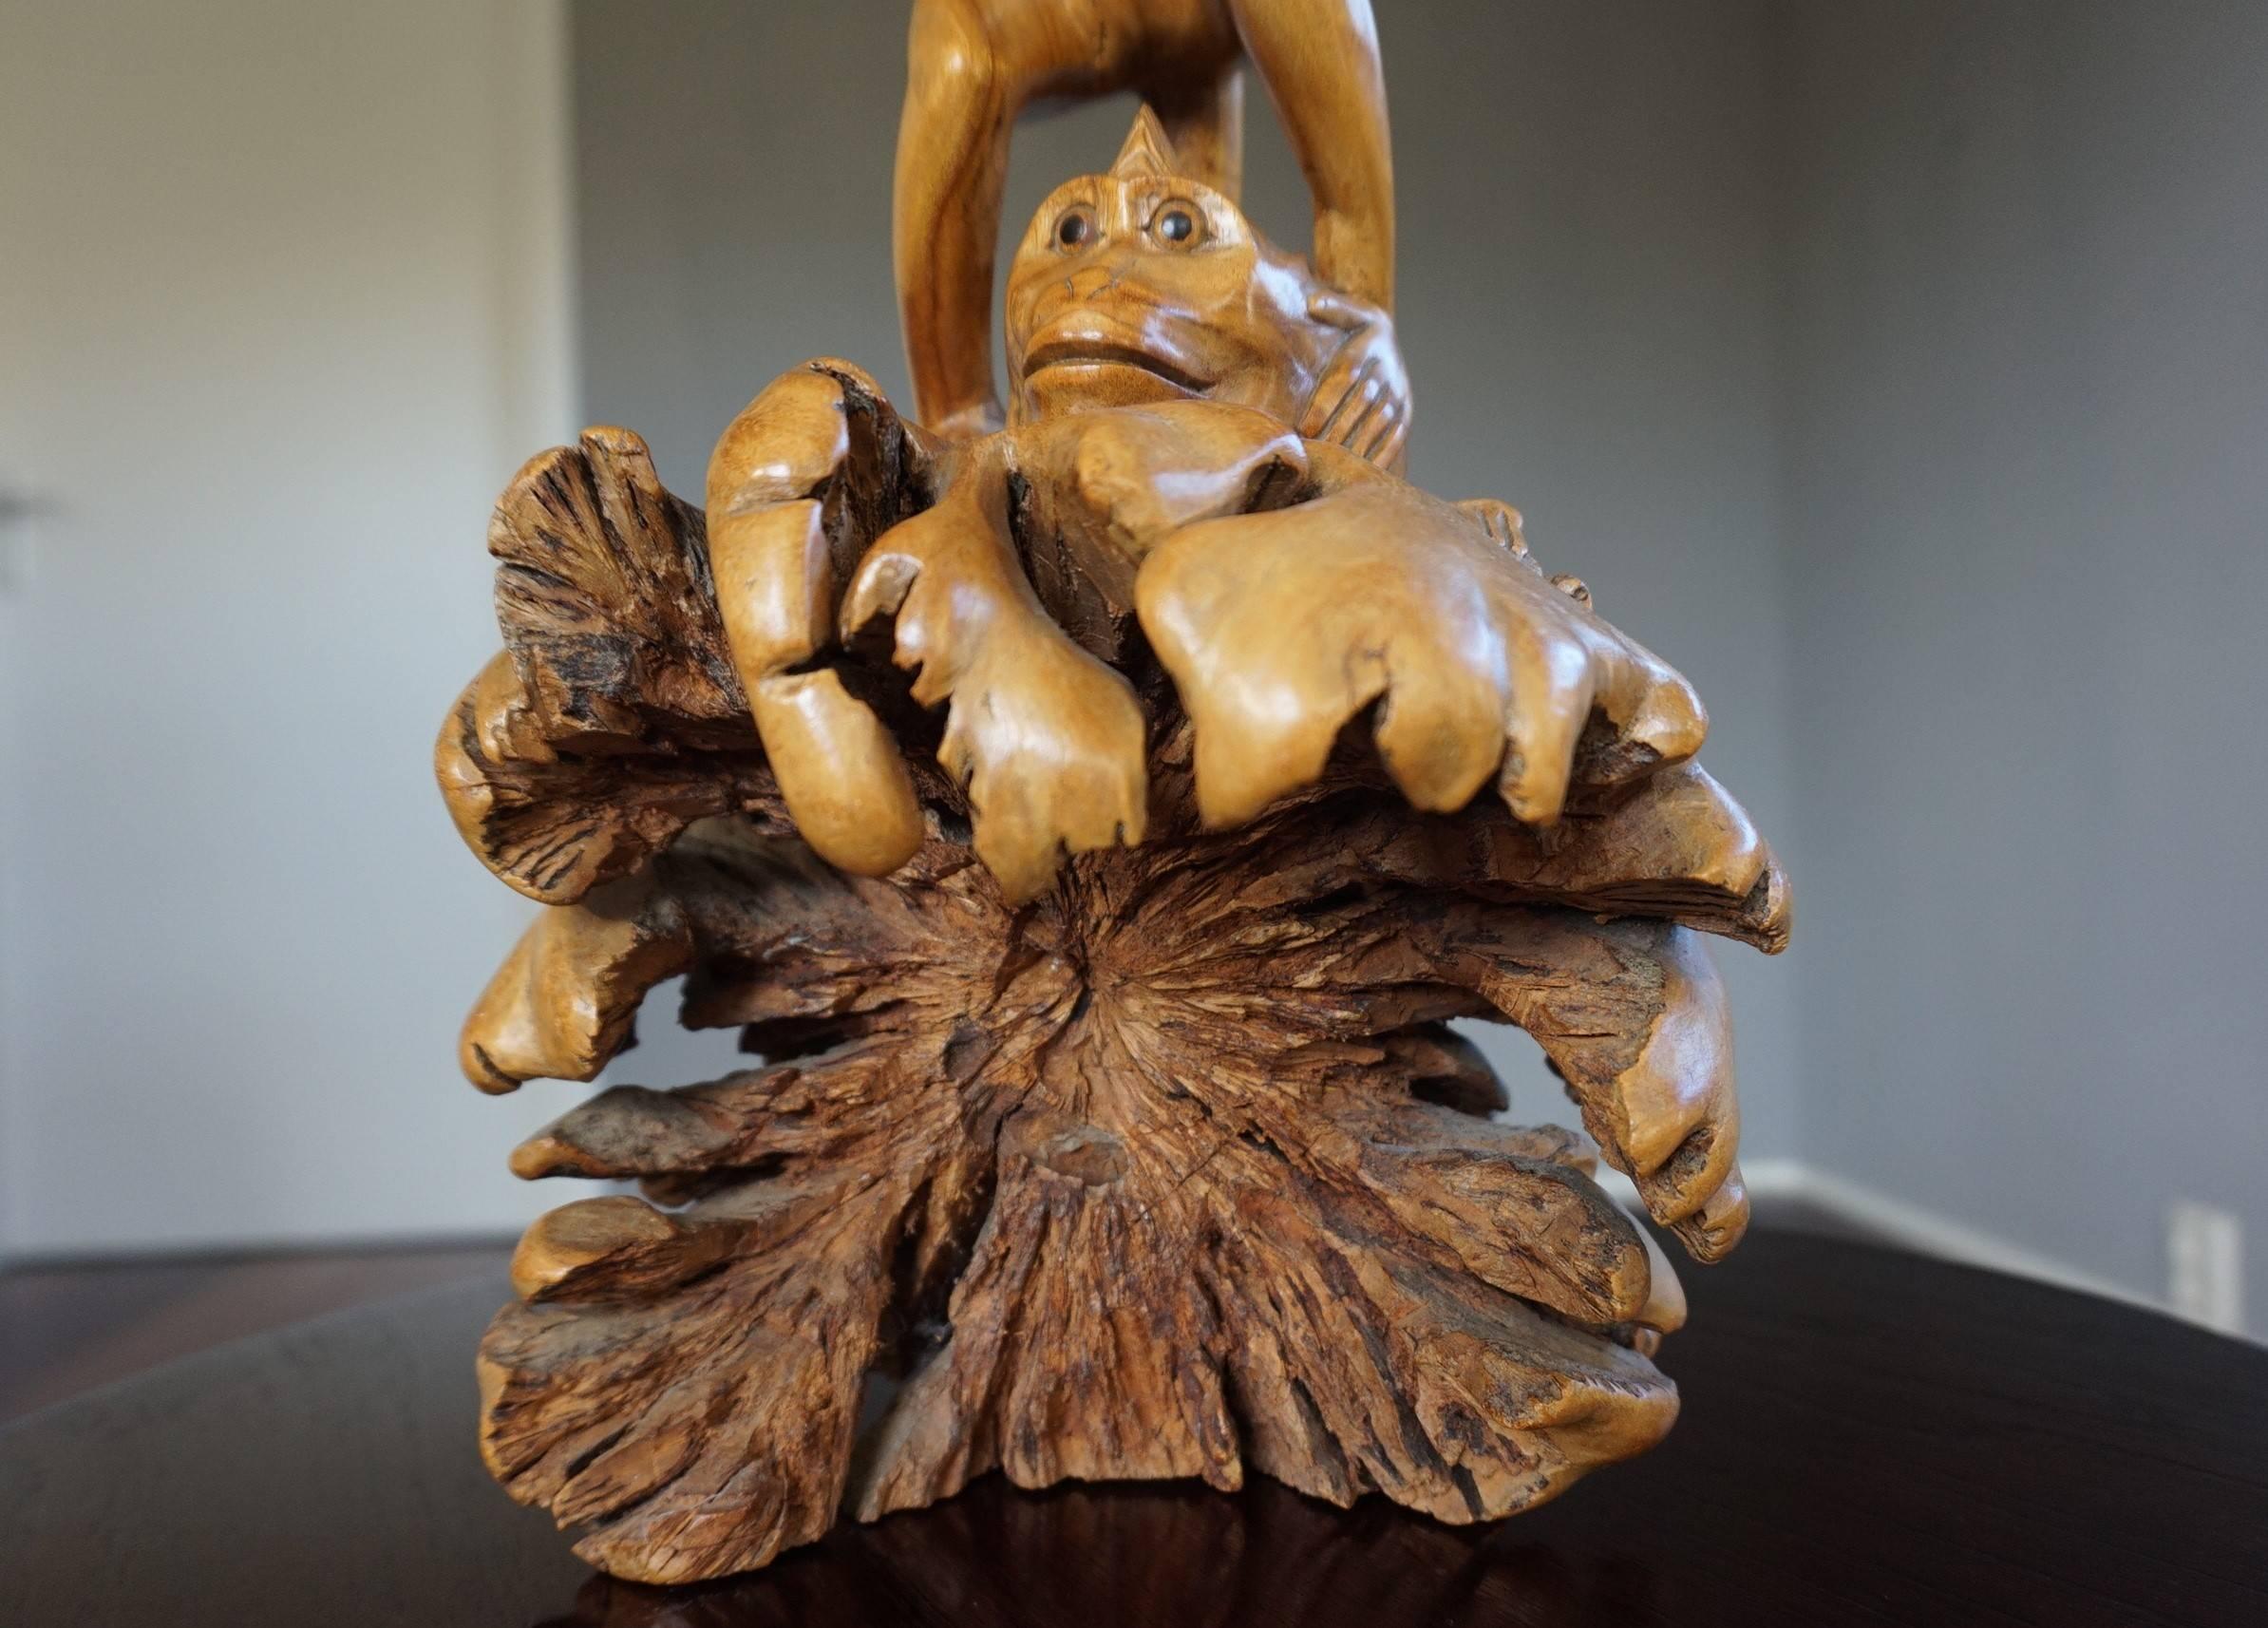 Asian Hand-Carved Wooden Midcentury Two Monkey Sculpture Out of Tropical Tree Trunk For Sale